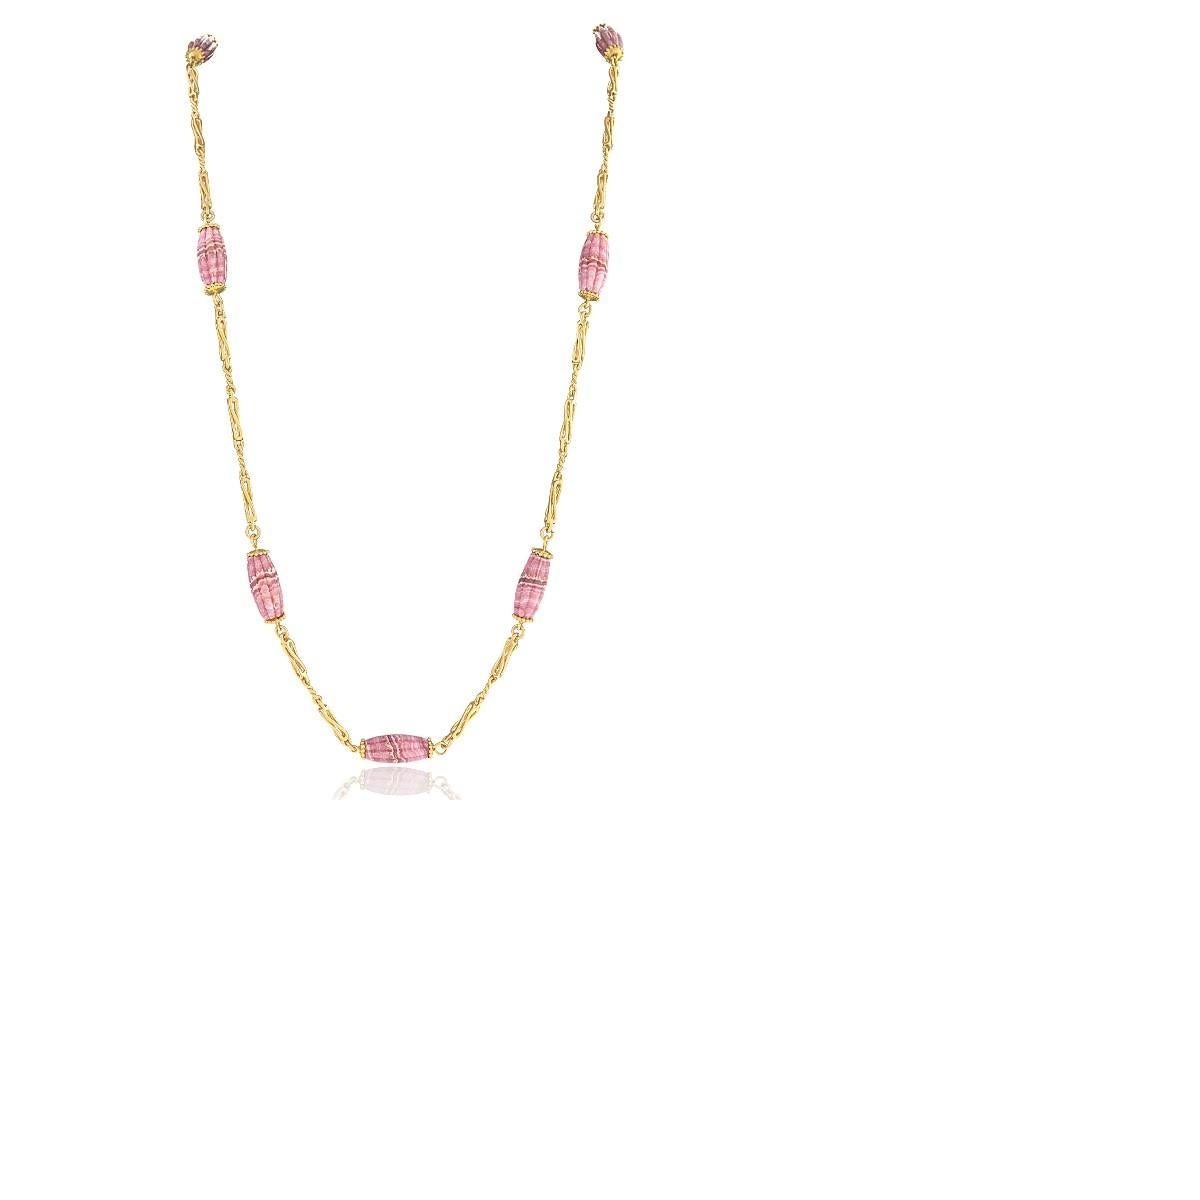 An 18 karat gold chain with 7 ribbed barrel-shaped rhodochrosite beads. The dynamic links of the chain feature an alternating pattern of elongated, polished metal design elements with shorter, textured sub-links cast so as to mimic the appearance of